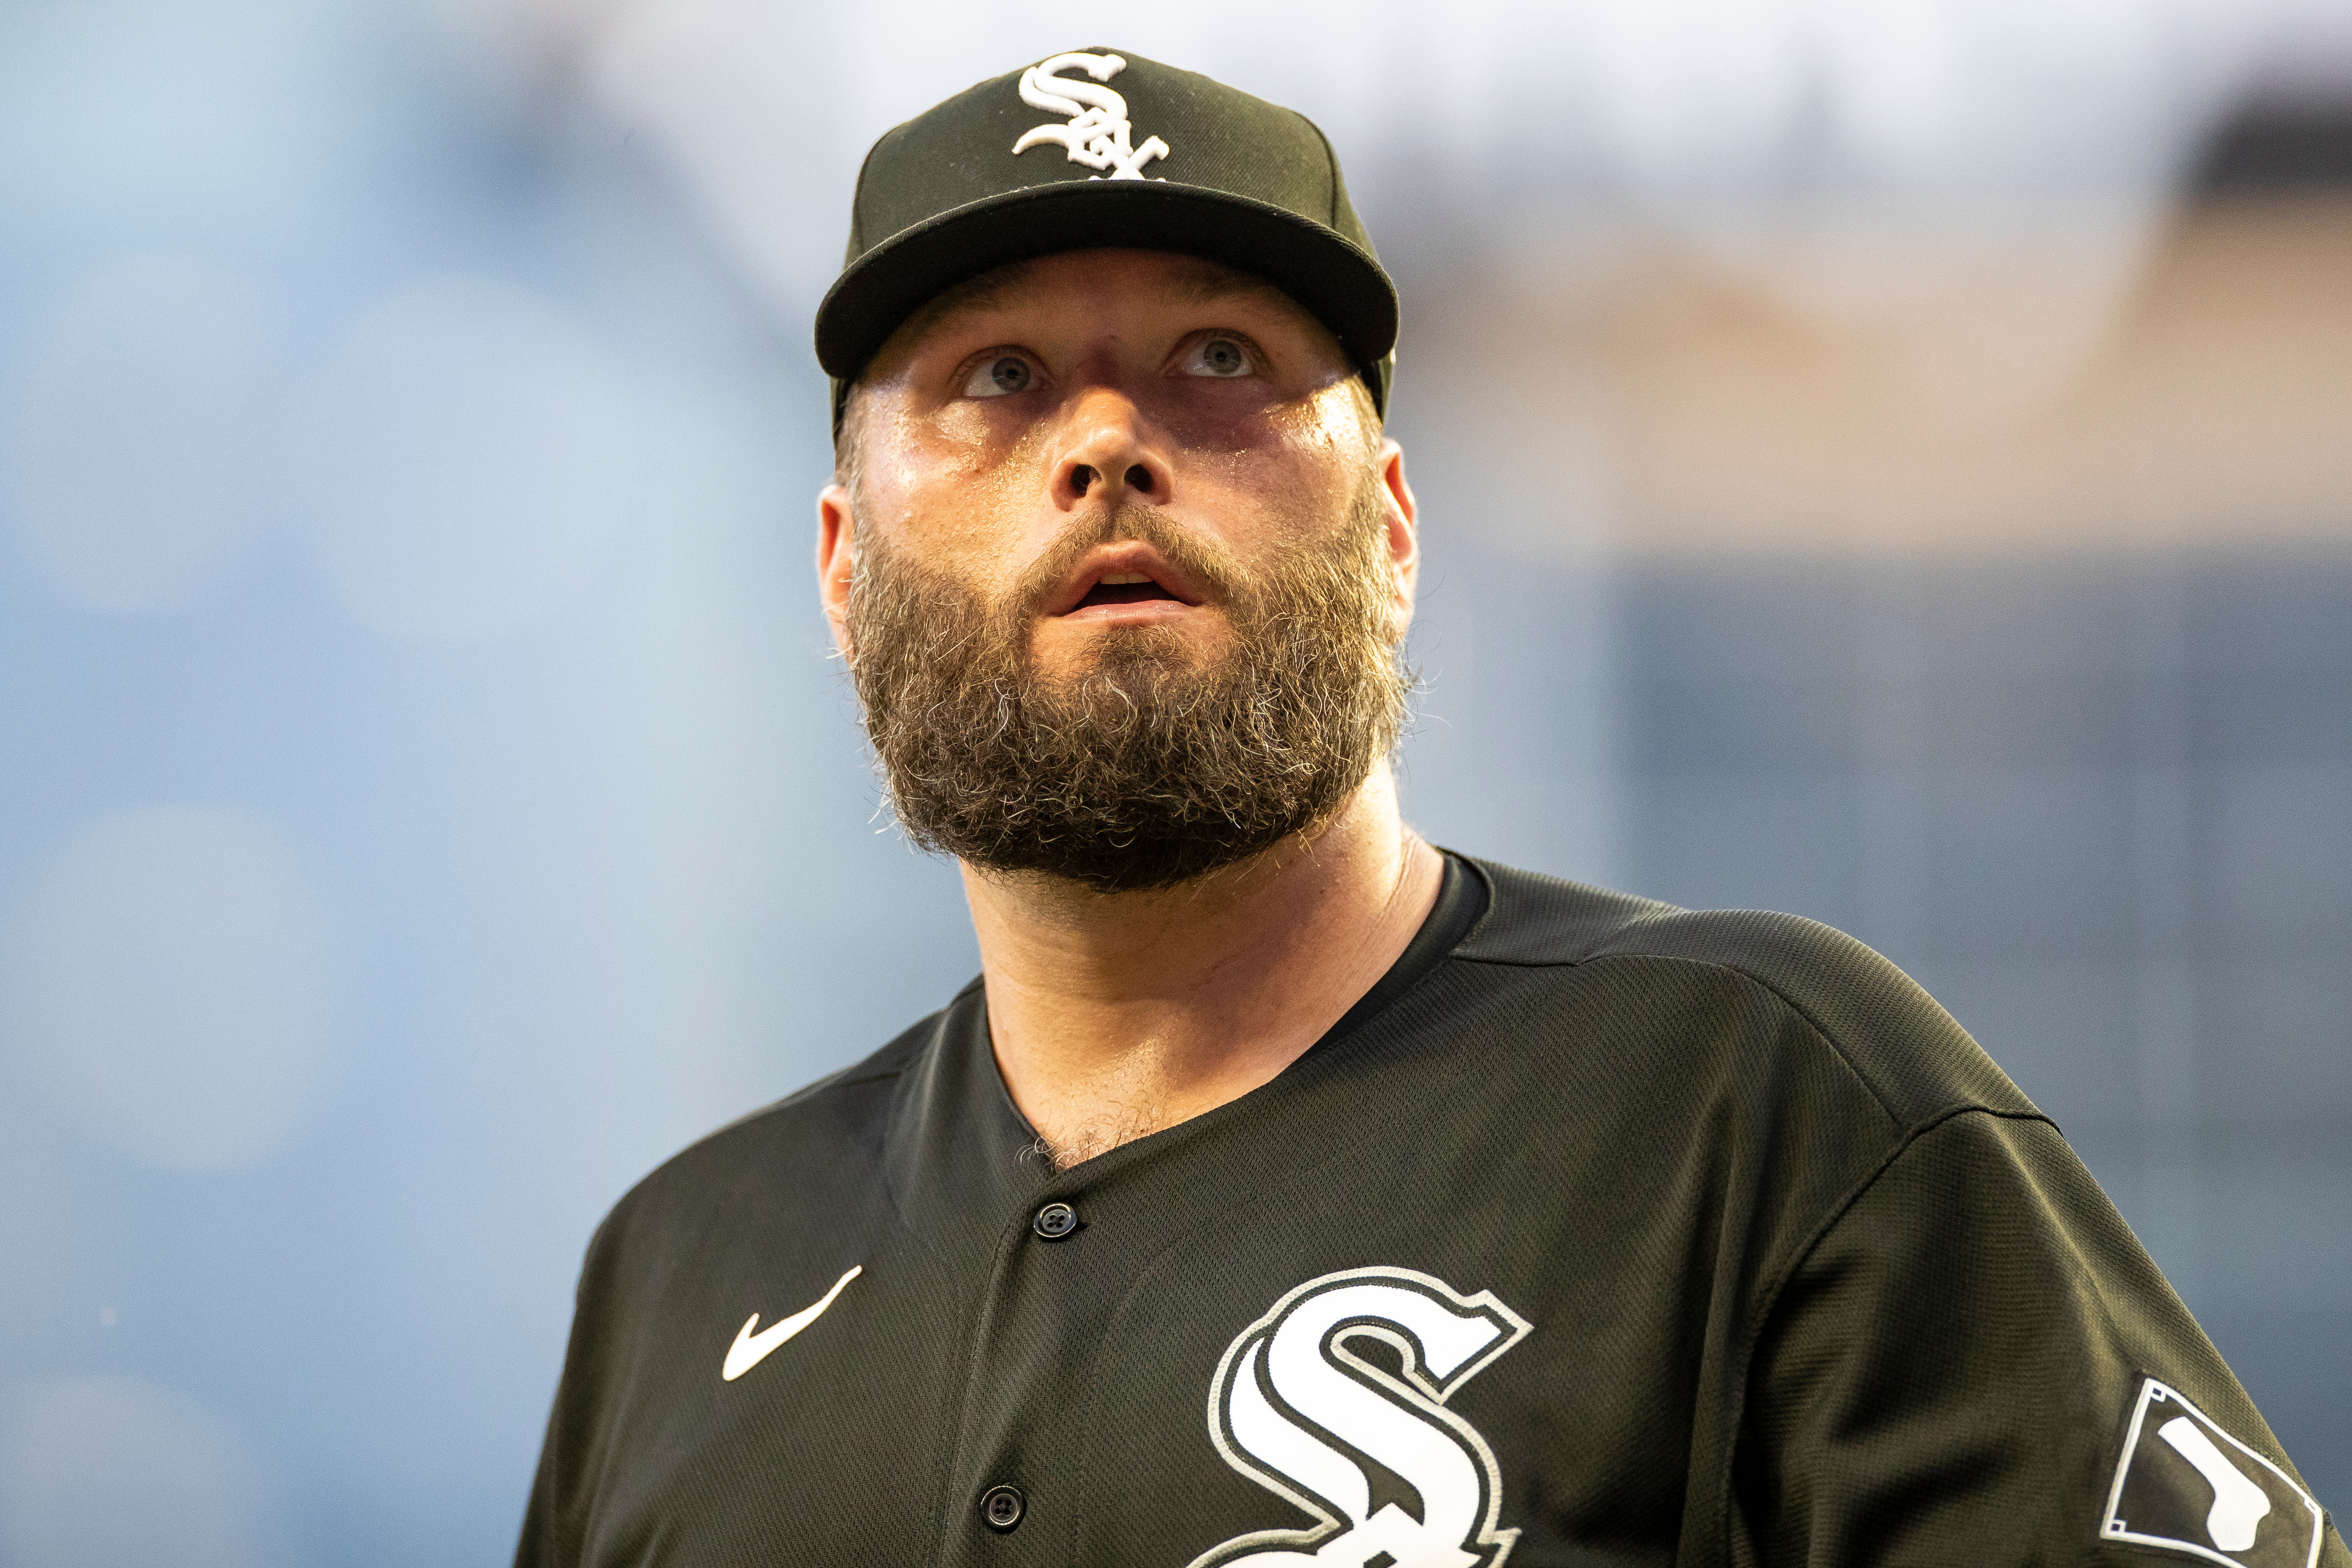 Lynn, White Sox agree on two-year, $38 million contract extension